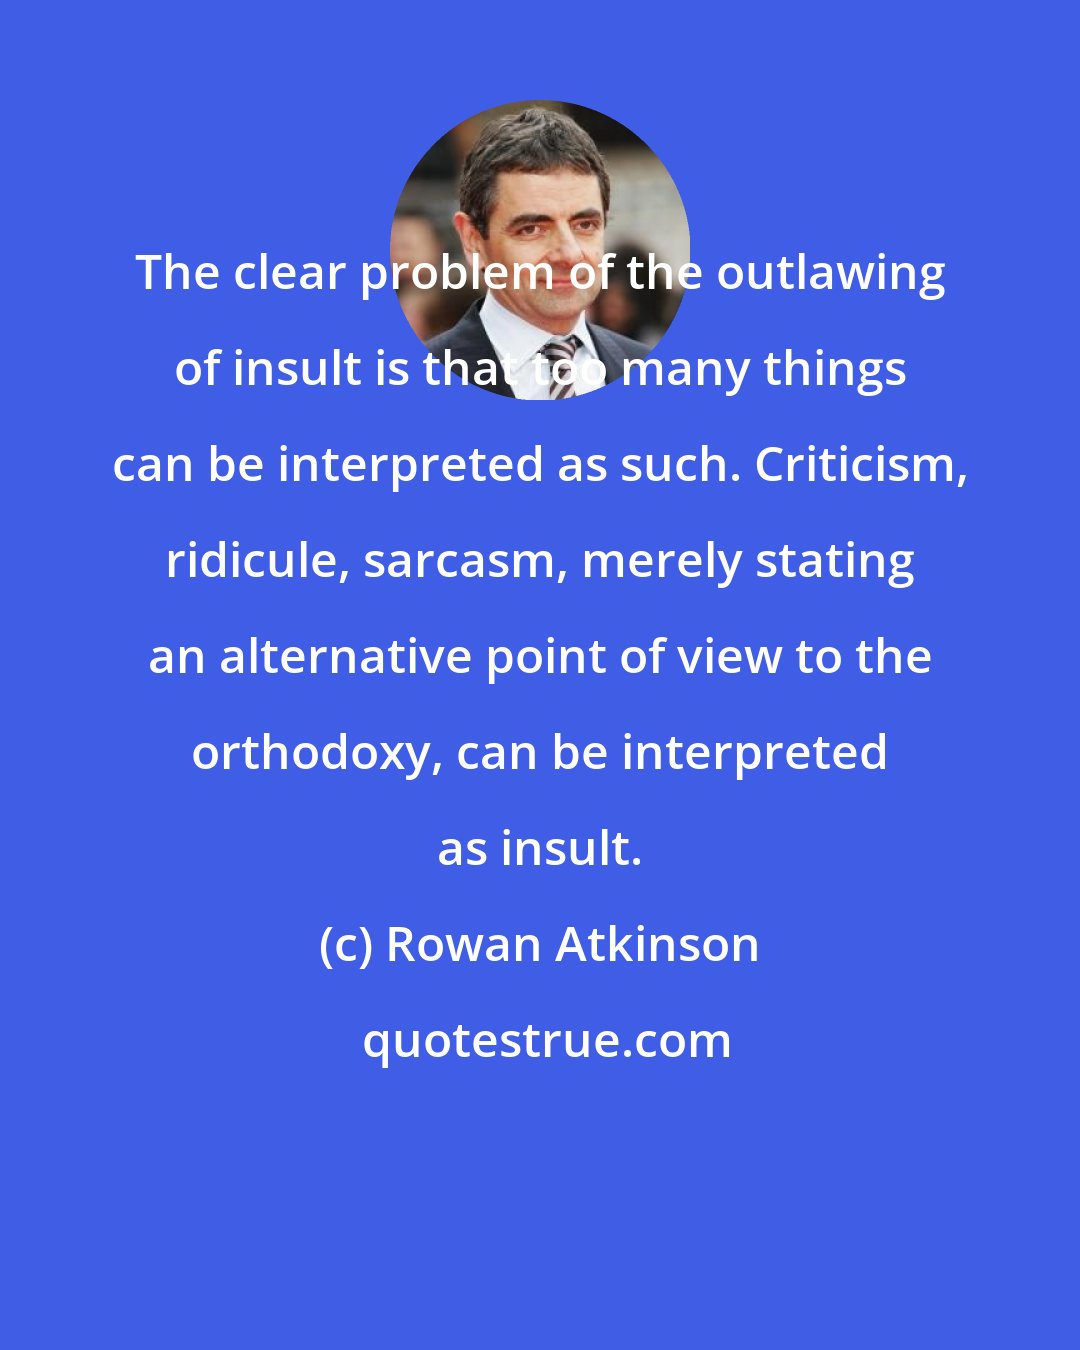 Rowan Atkinson: The clear problem of the outlawing of insult is that too many things can be interpreted as such. Criticism, ridicule, sarcasm, merely stating an alternative point of view to the orthodoxy, can be interpreted as insult.